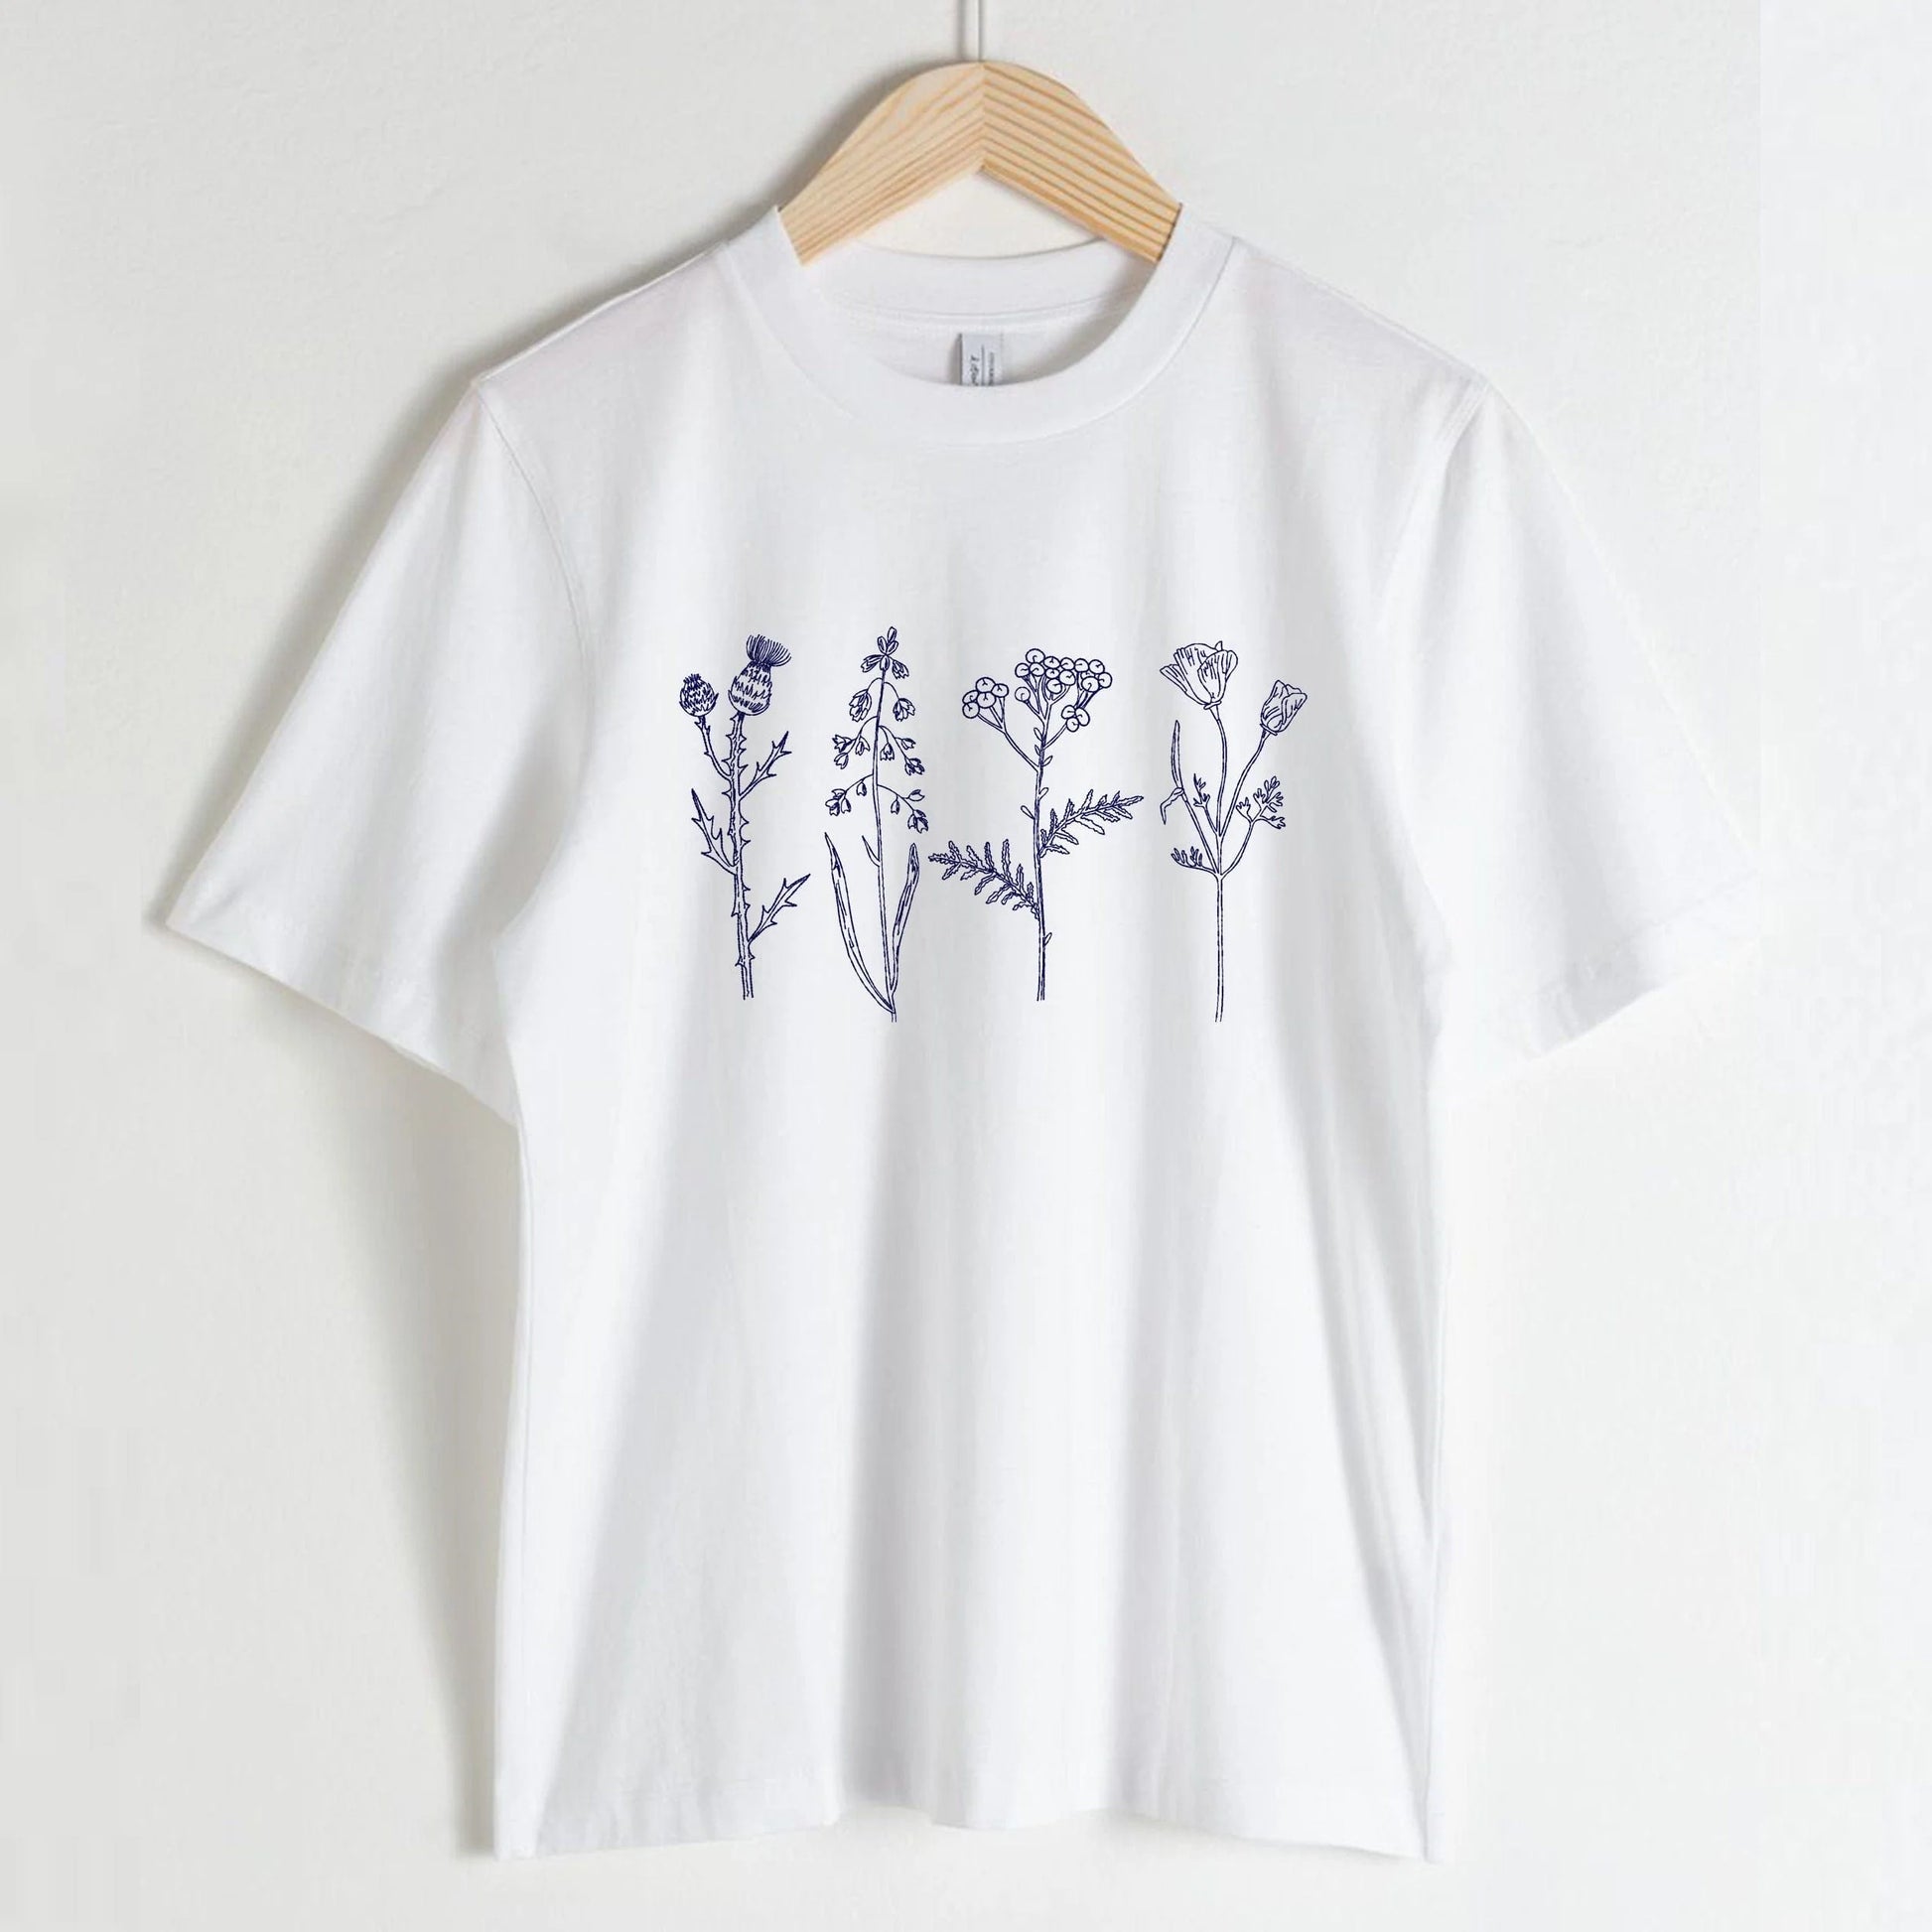 Chinoiserie Meadow Flowers Machine Embroidery Design on t-shirt